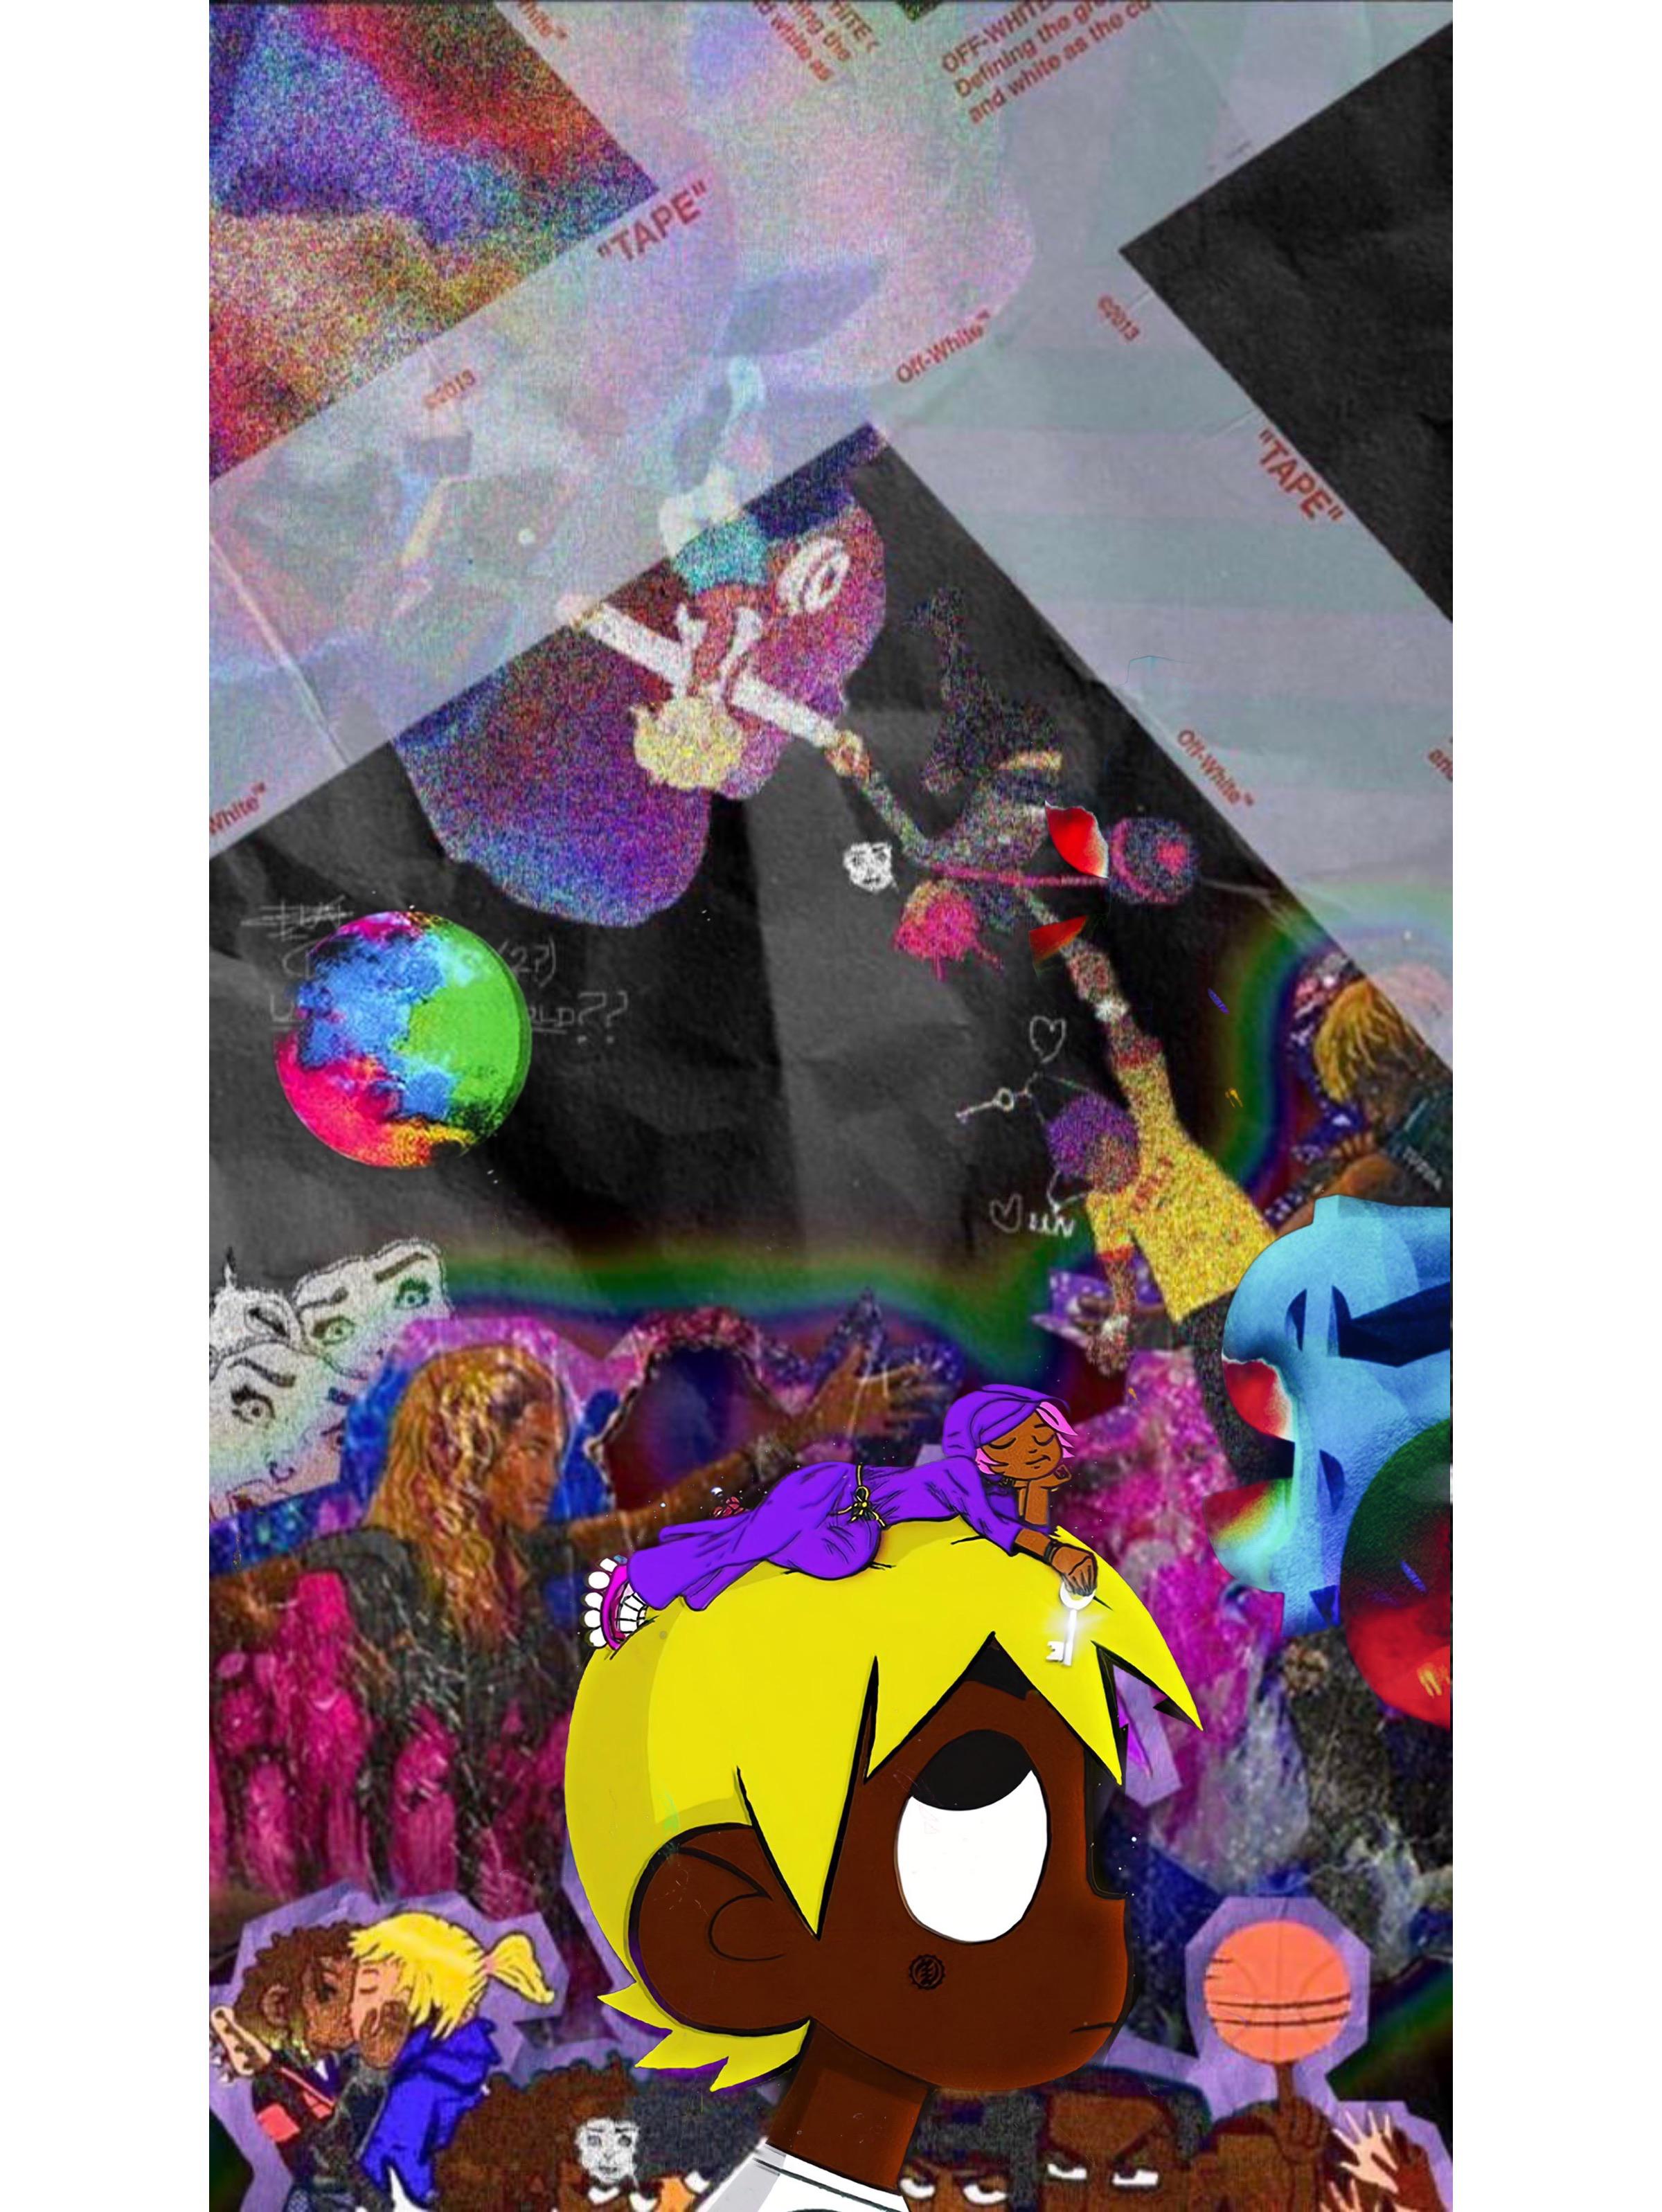 Updated this wallpapers for LUV vs The World 2 : liluzivert.